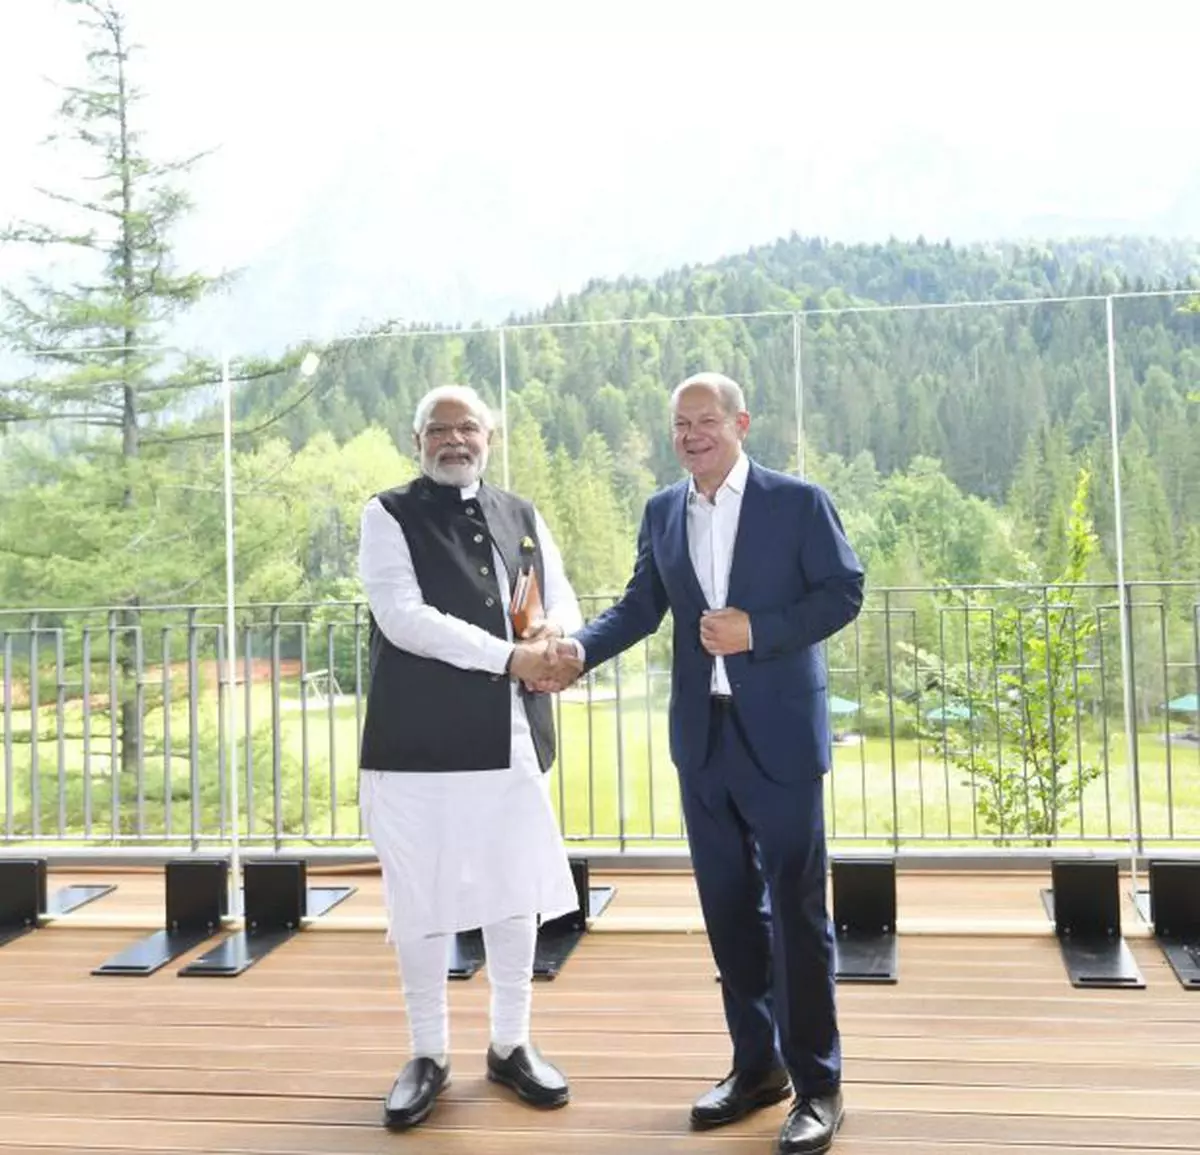 Prime Minister Narendra Modi with German Chancellor Olaf Scholz at G-7 Summit, in Germany on June 27, 2022